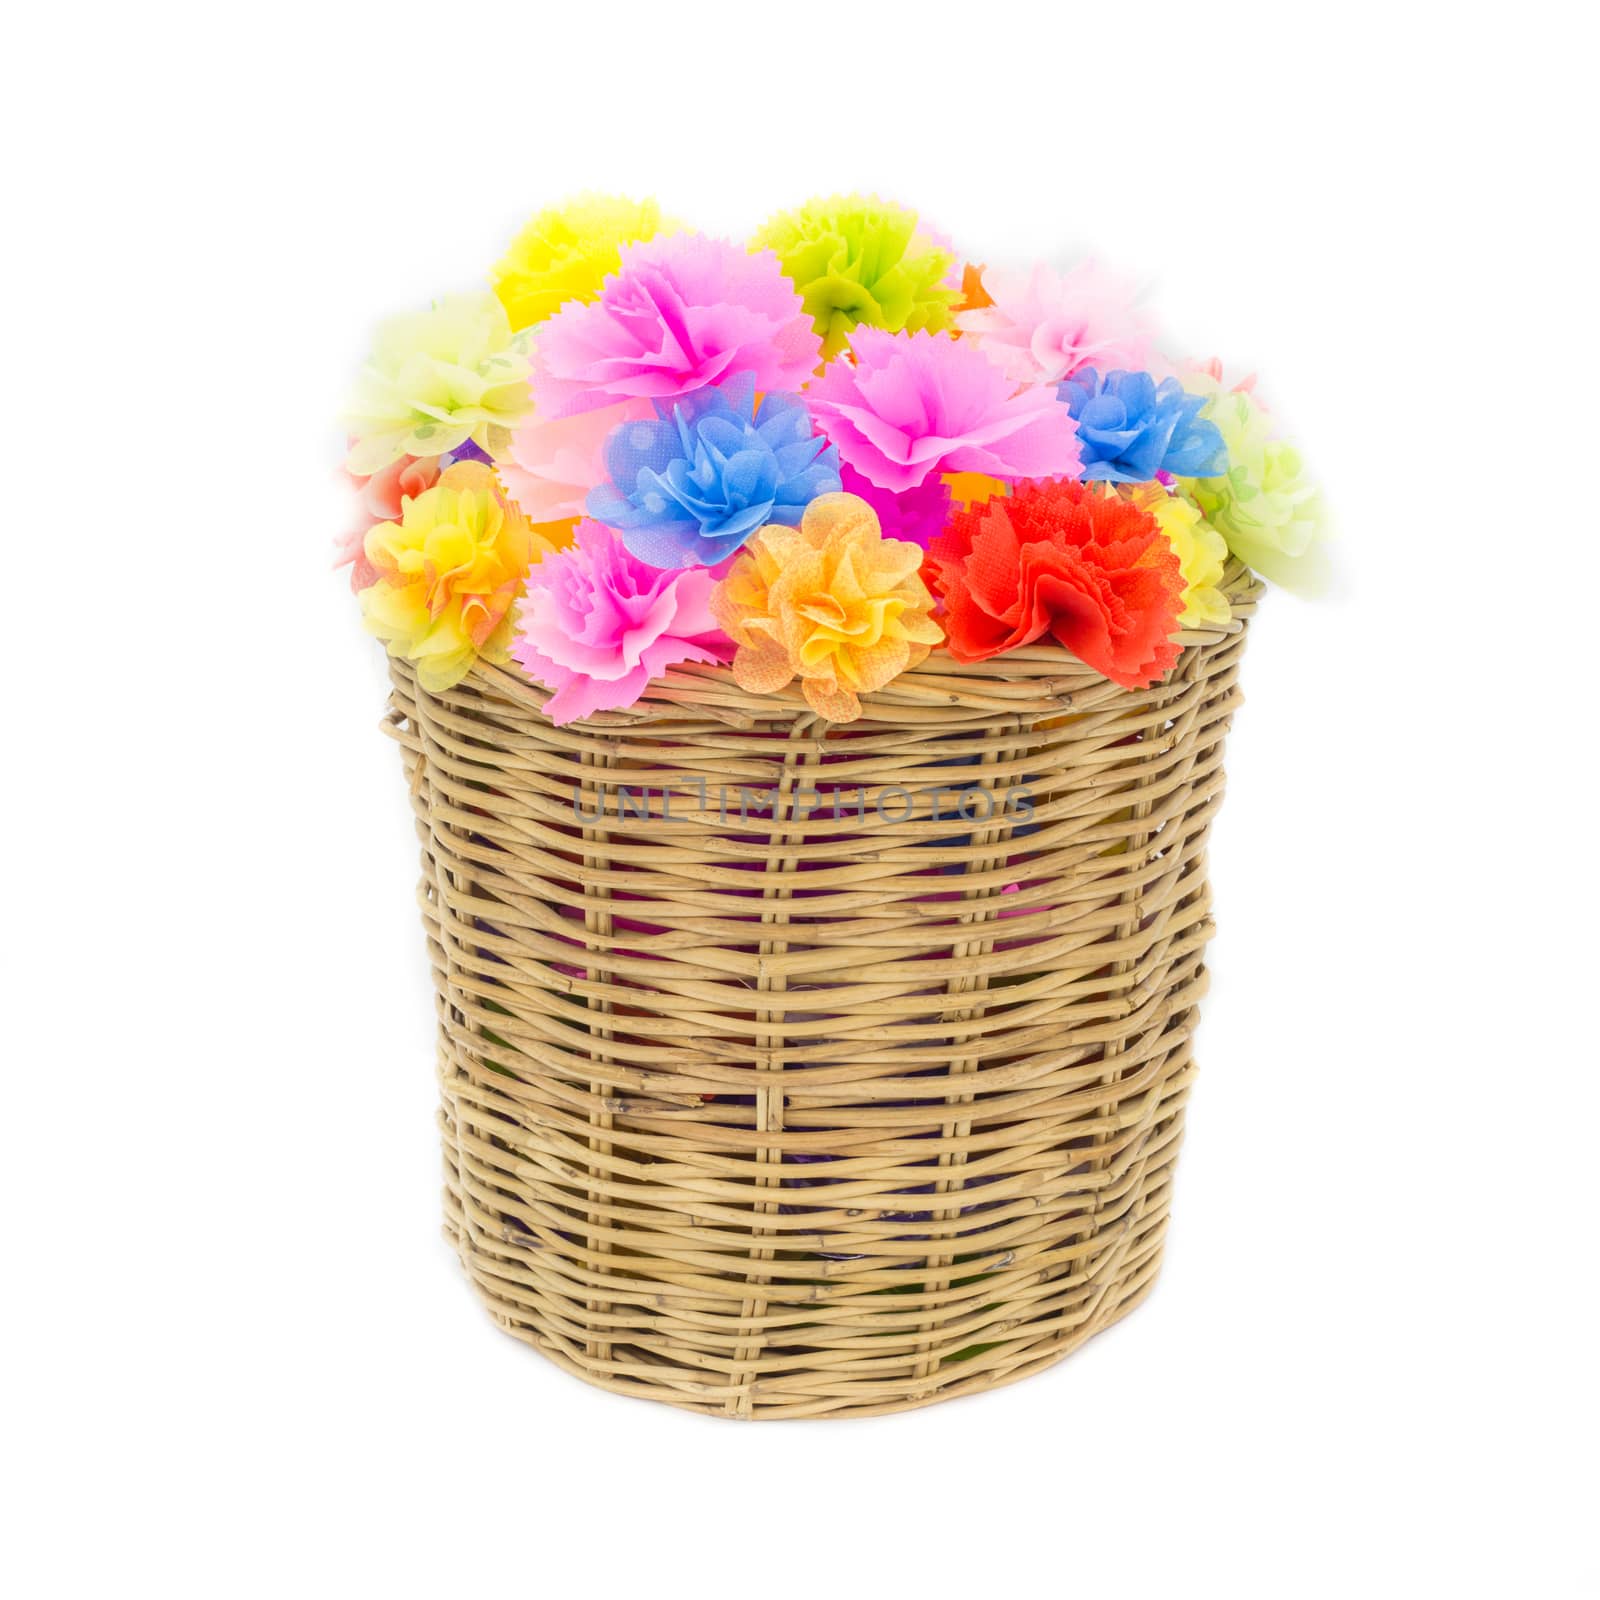 Bright flowers in basket isolated on white by powerbeephoto